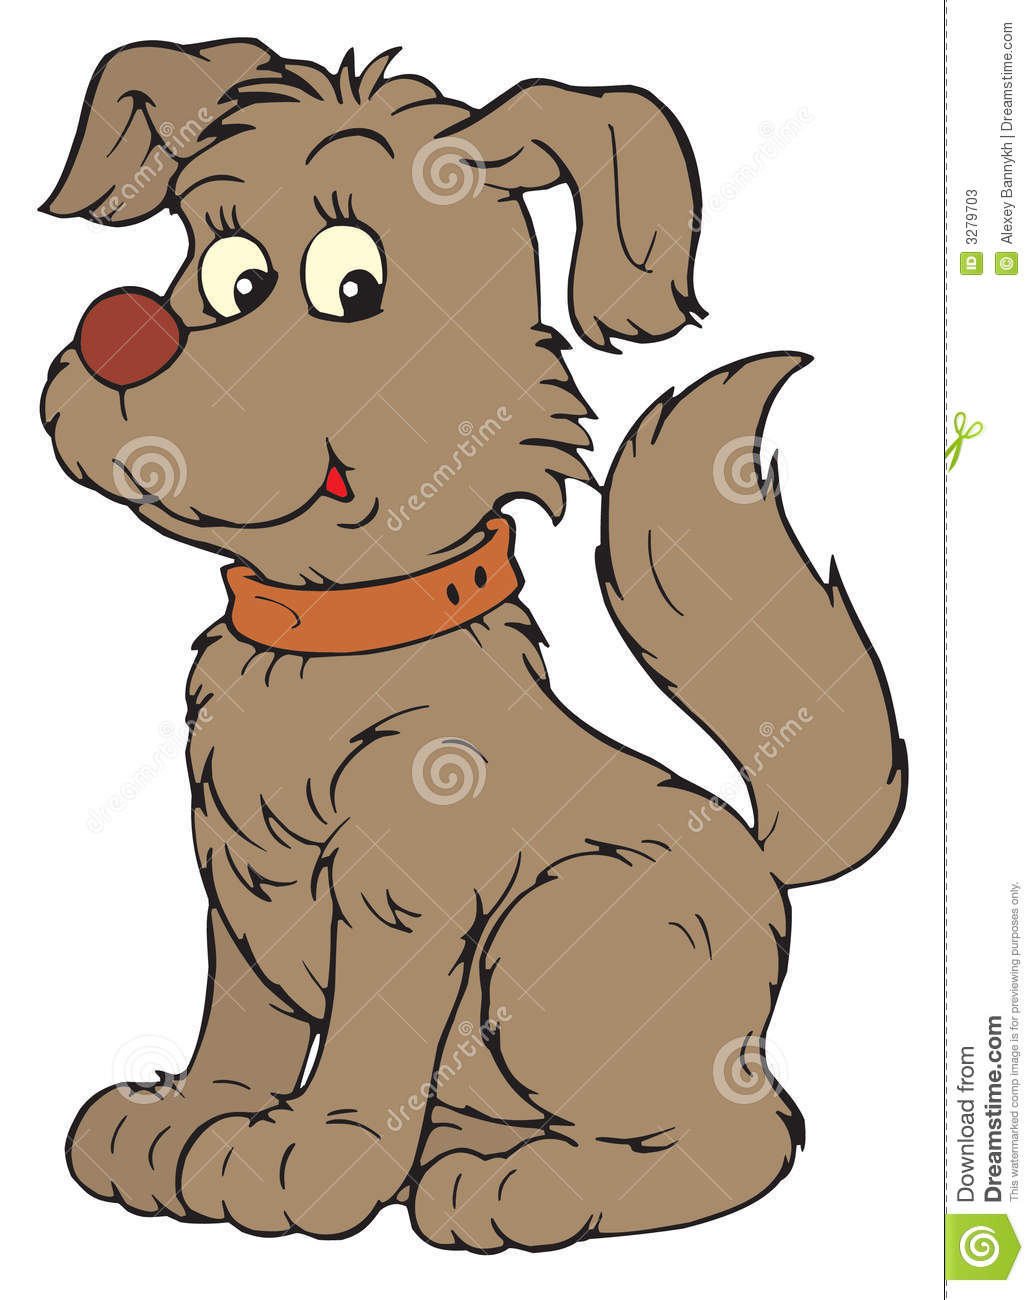 dog related clip art - photo #17